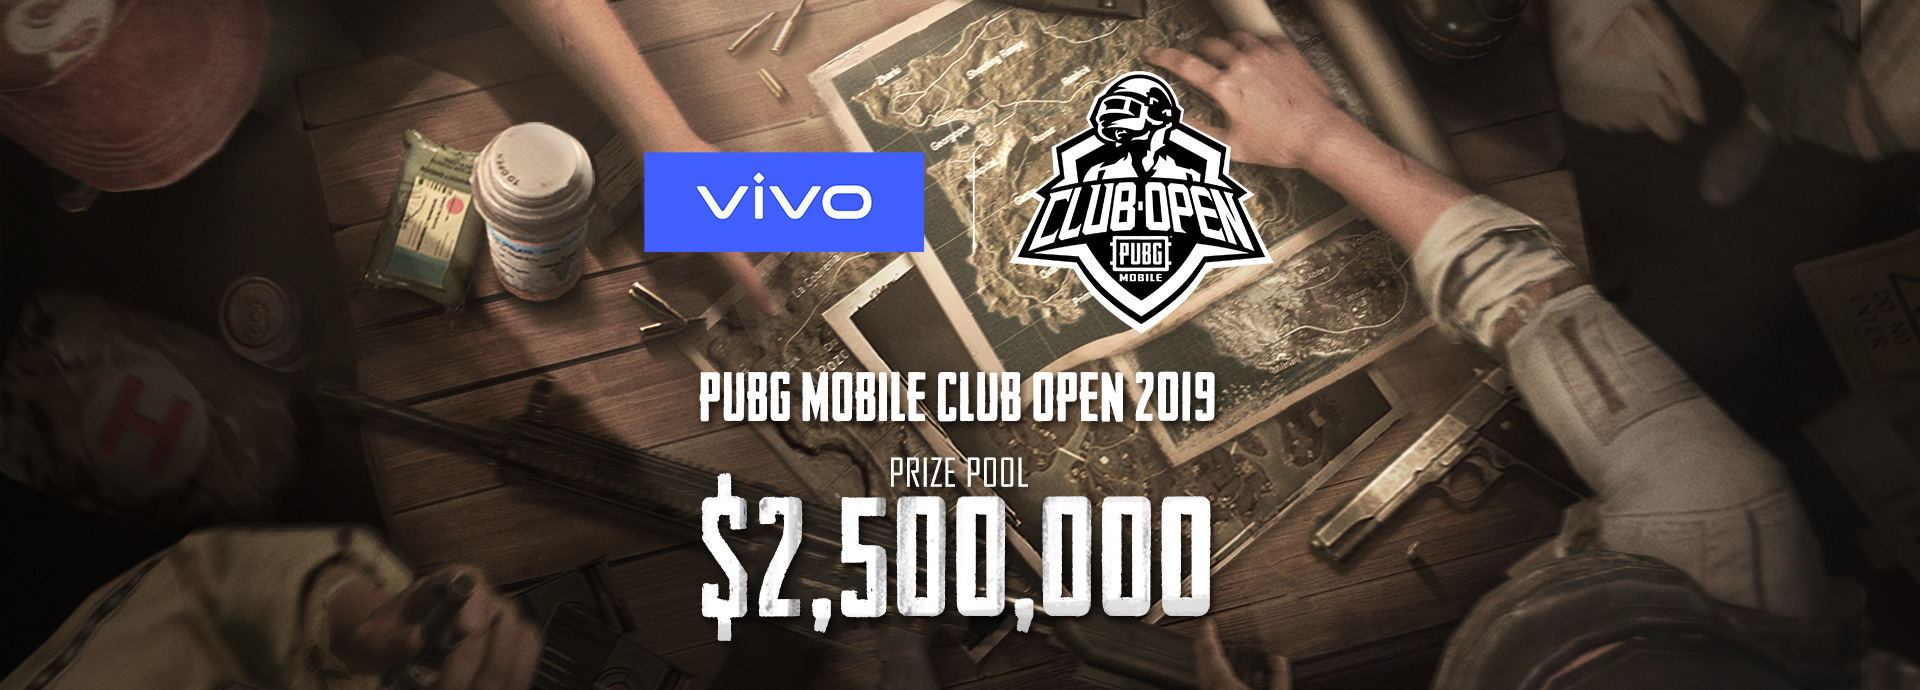 Club Open PUBG Mobile 2019 Every Thing You Need To Know - 